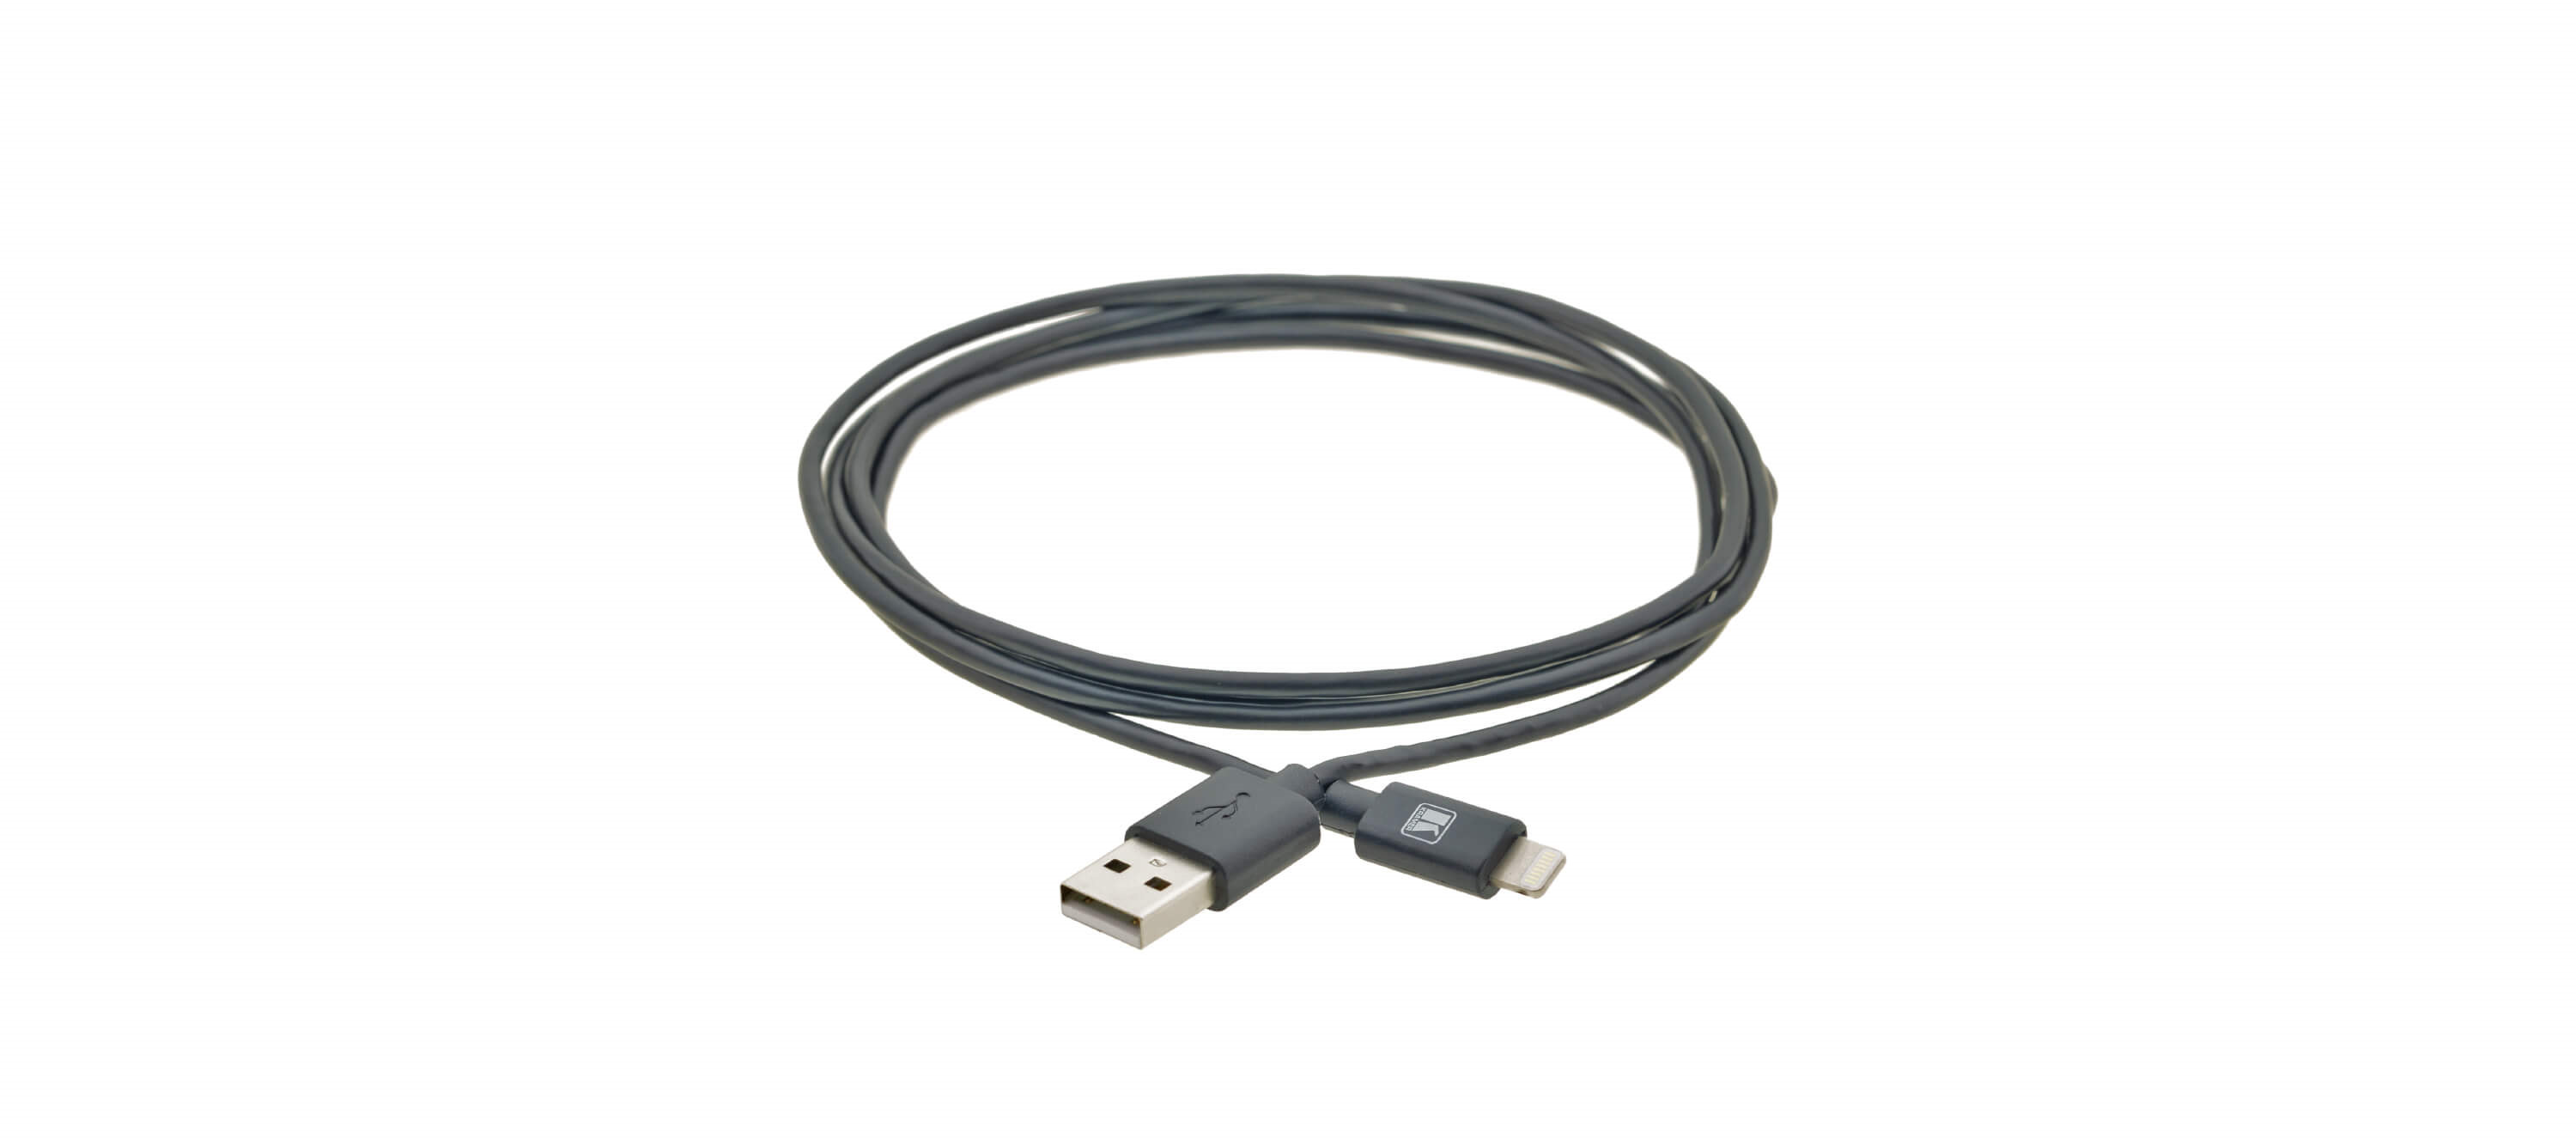 C-UA/LTN/BK-3 Apple Certified Lightning to USB Sync & Charge Cable